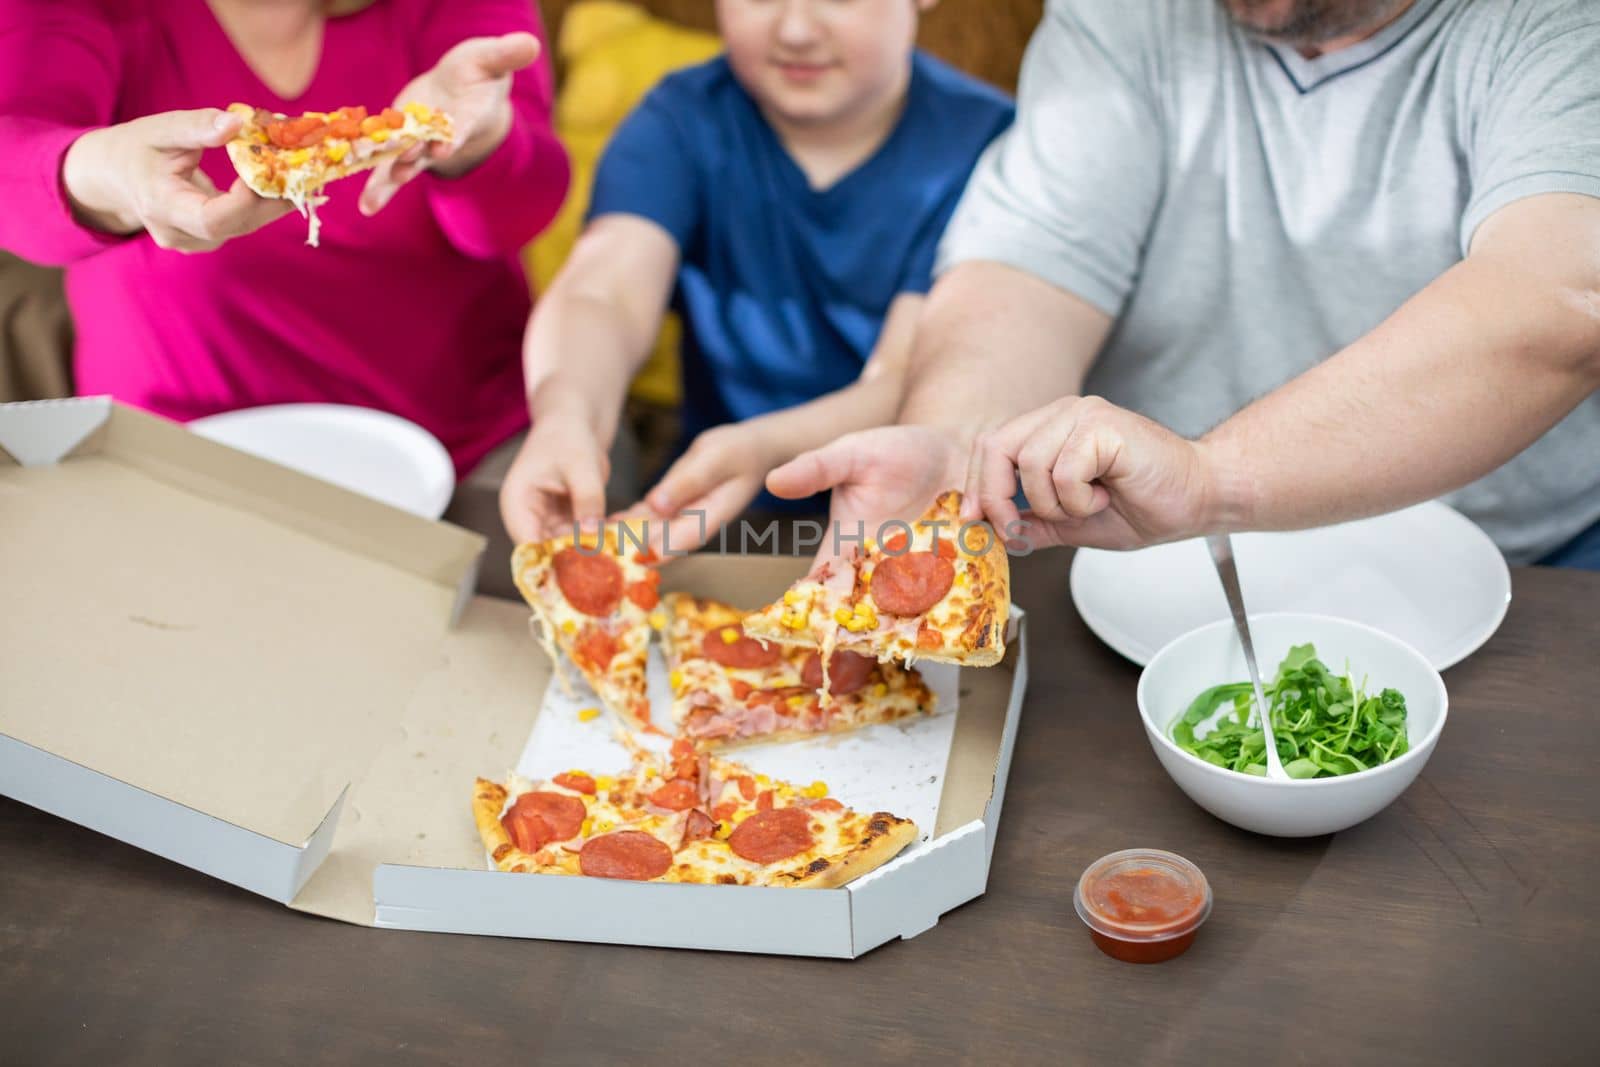 Mother, Father and son treat themselves to hot and fragrant slices of pizza from a box.